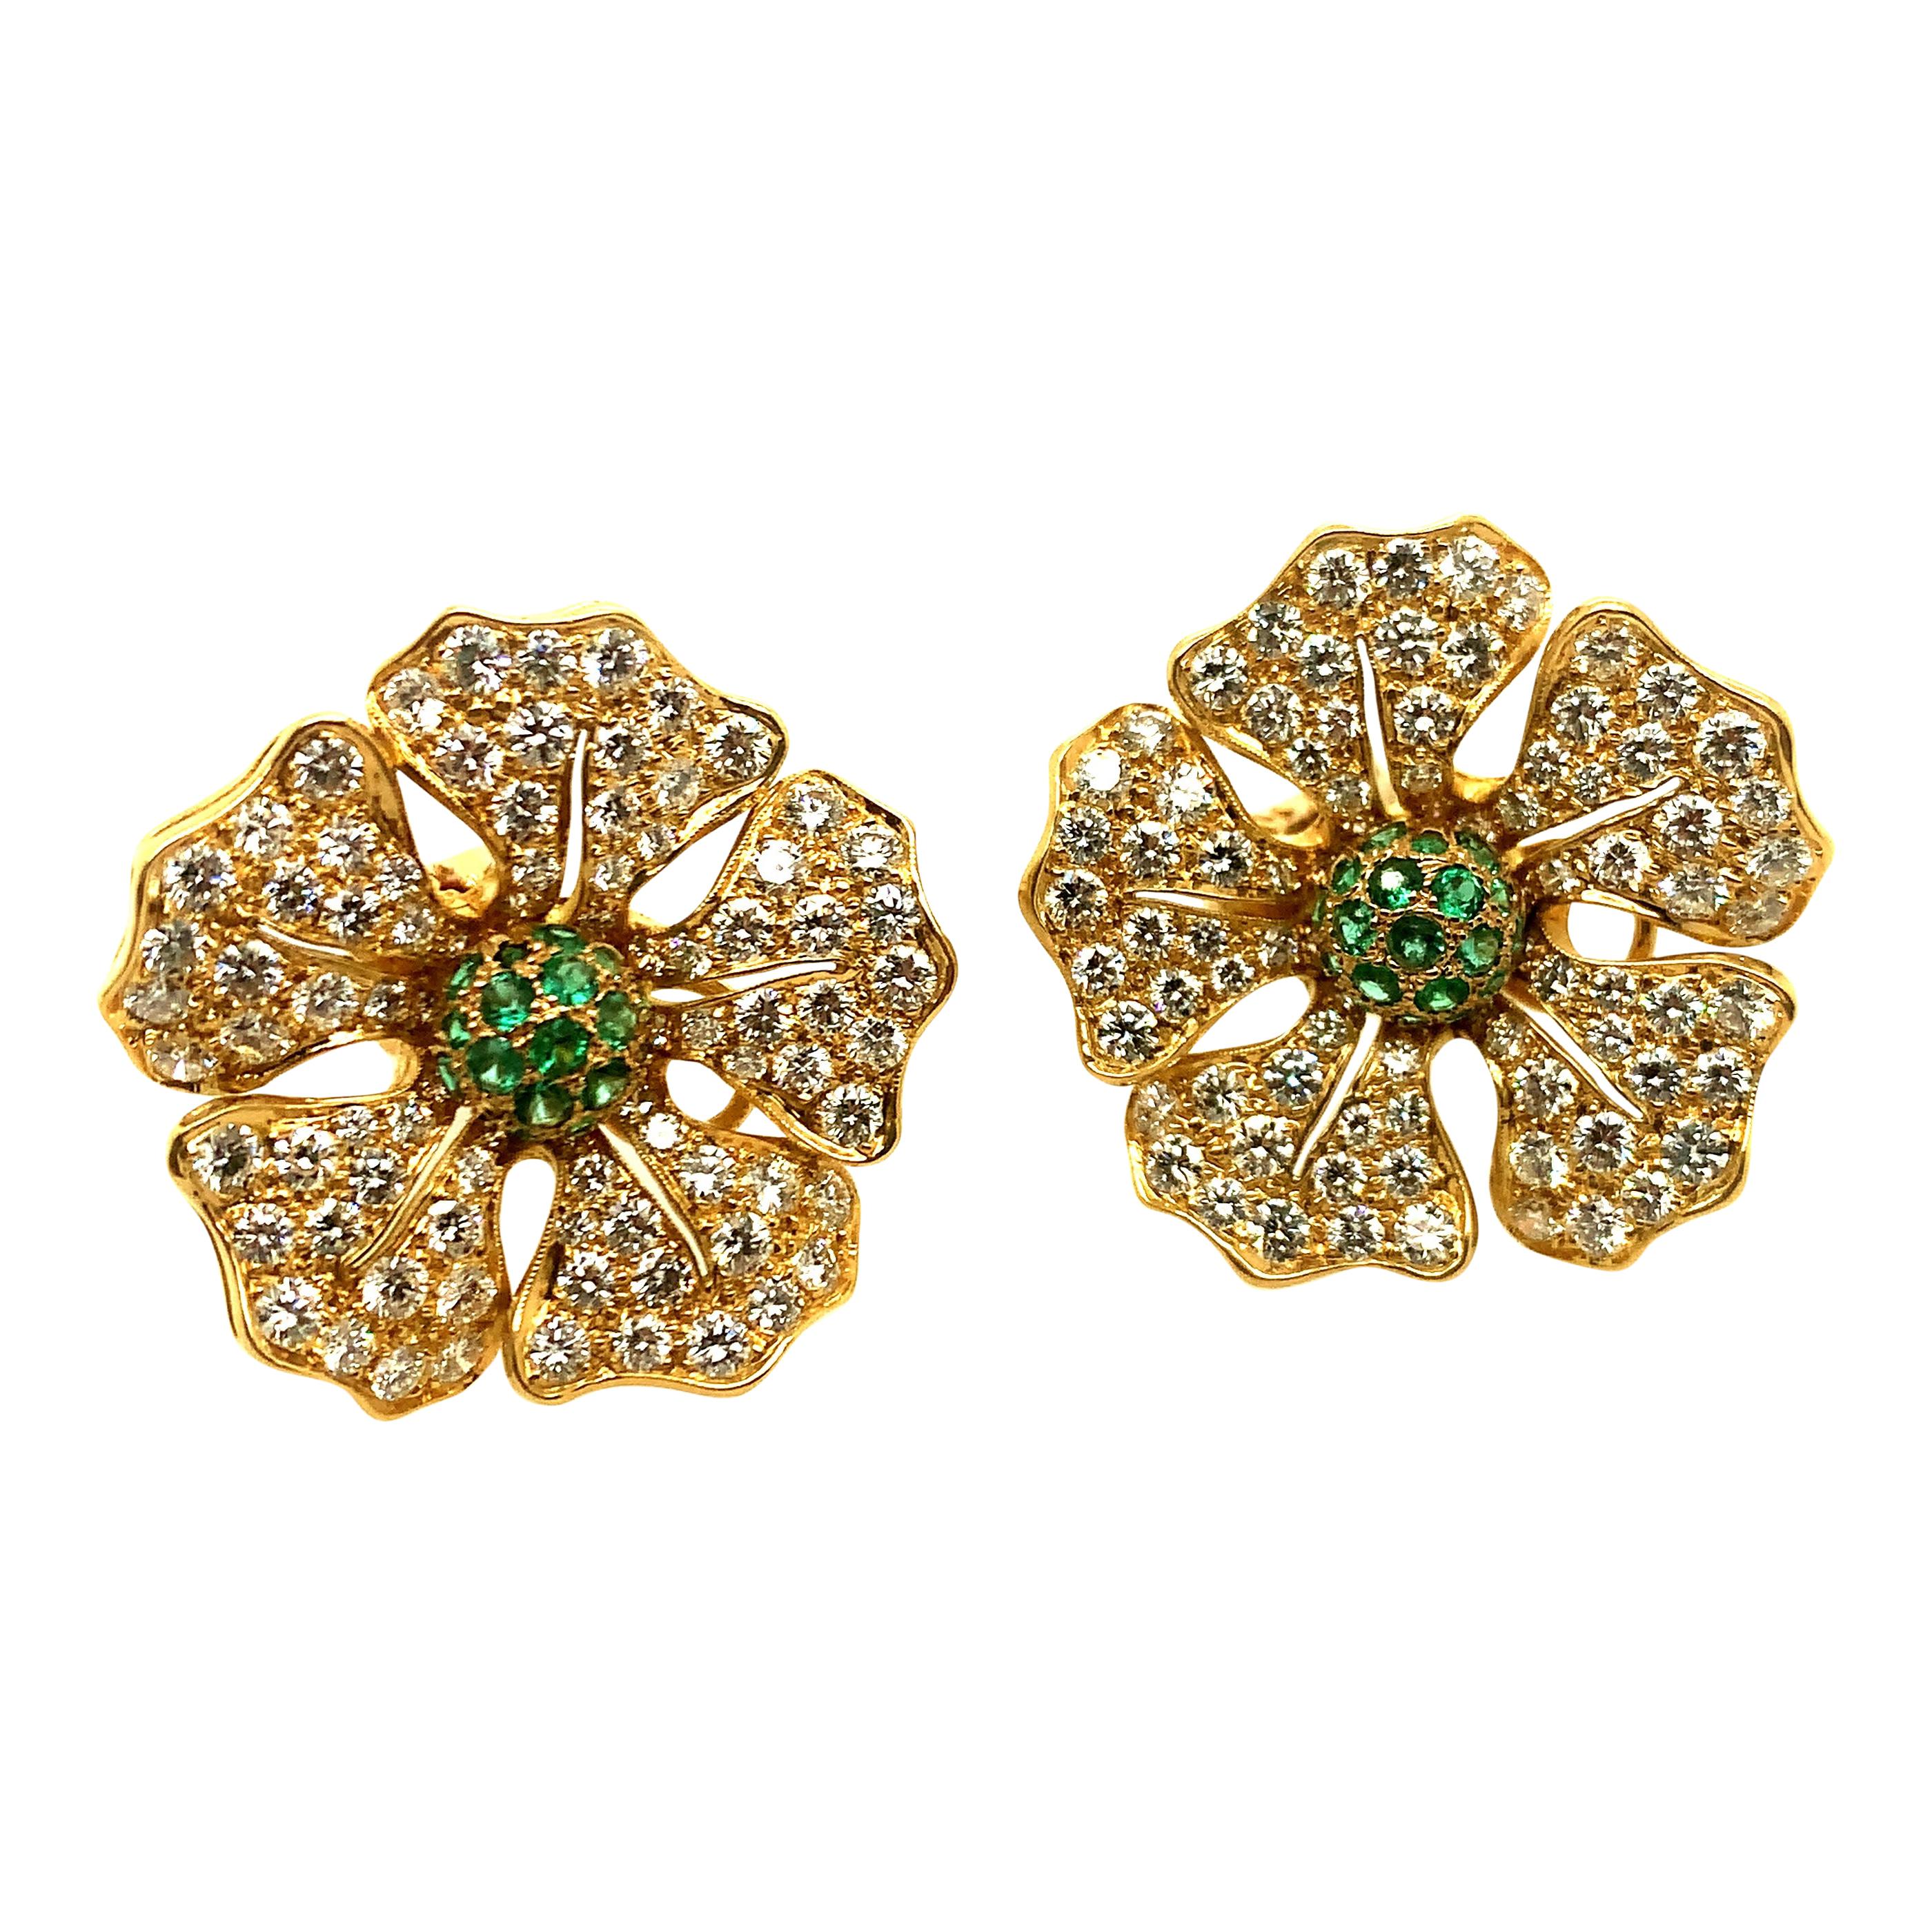 Diamond Pave and Emerald Flower Earrings